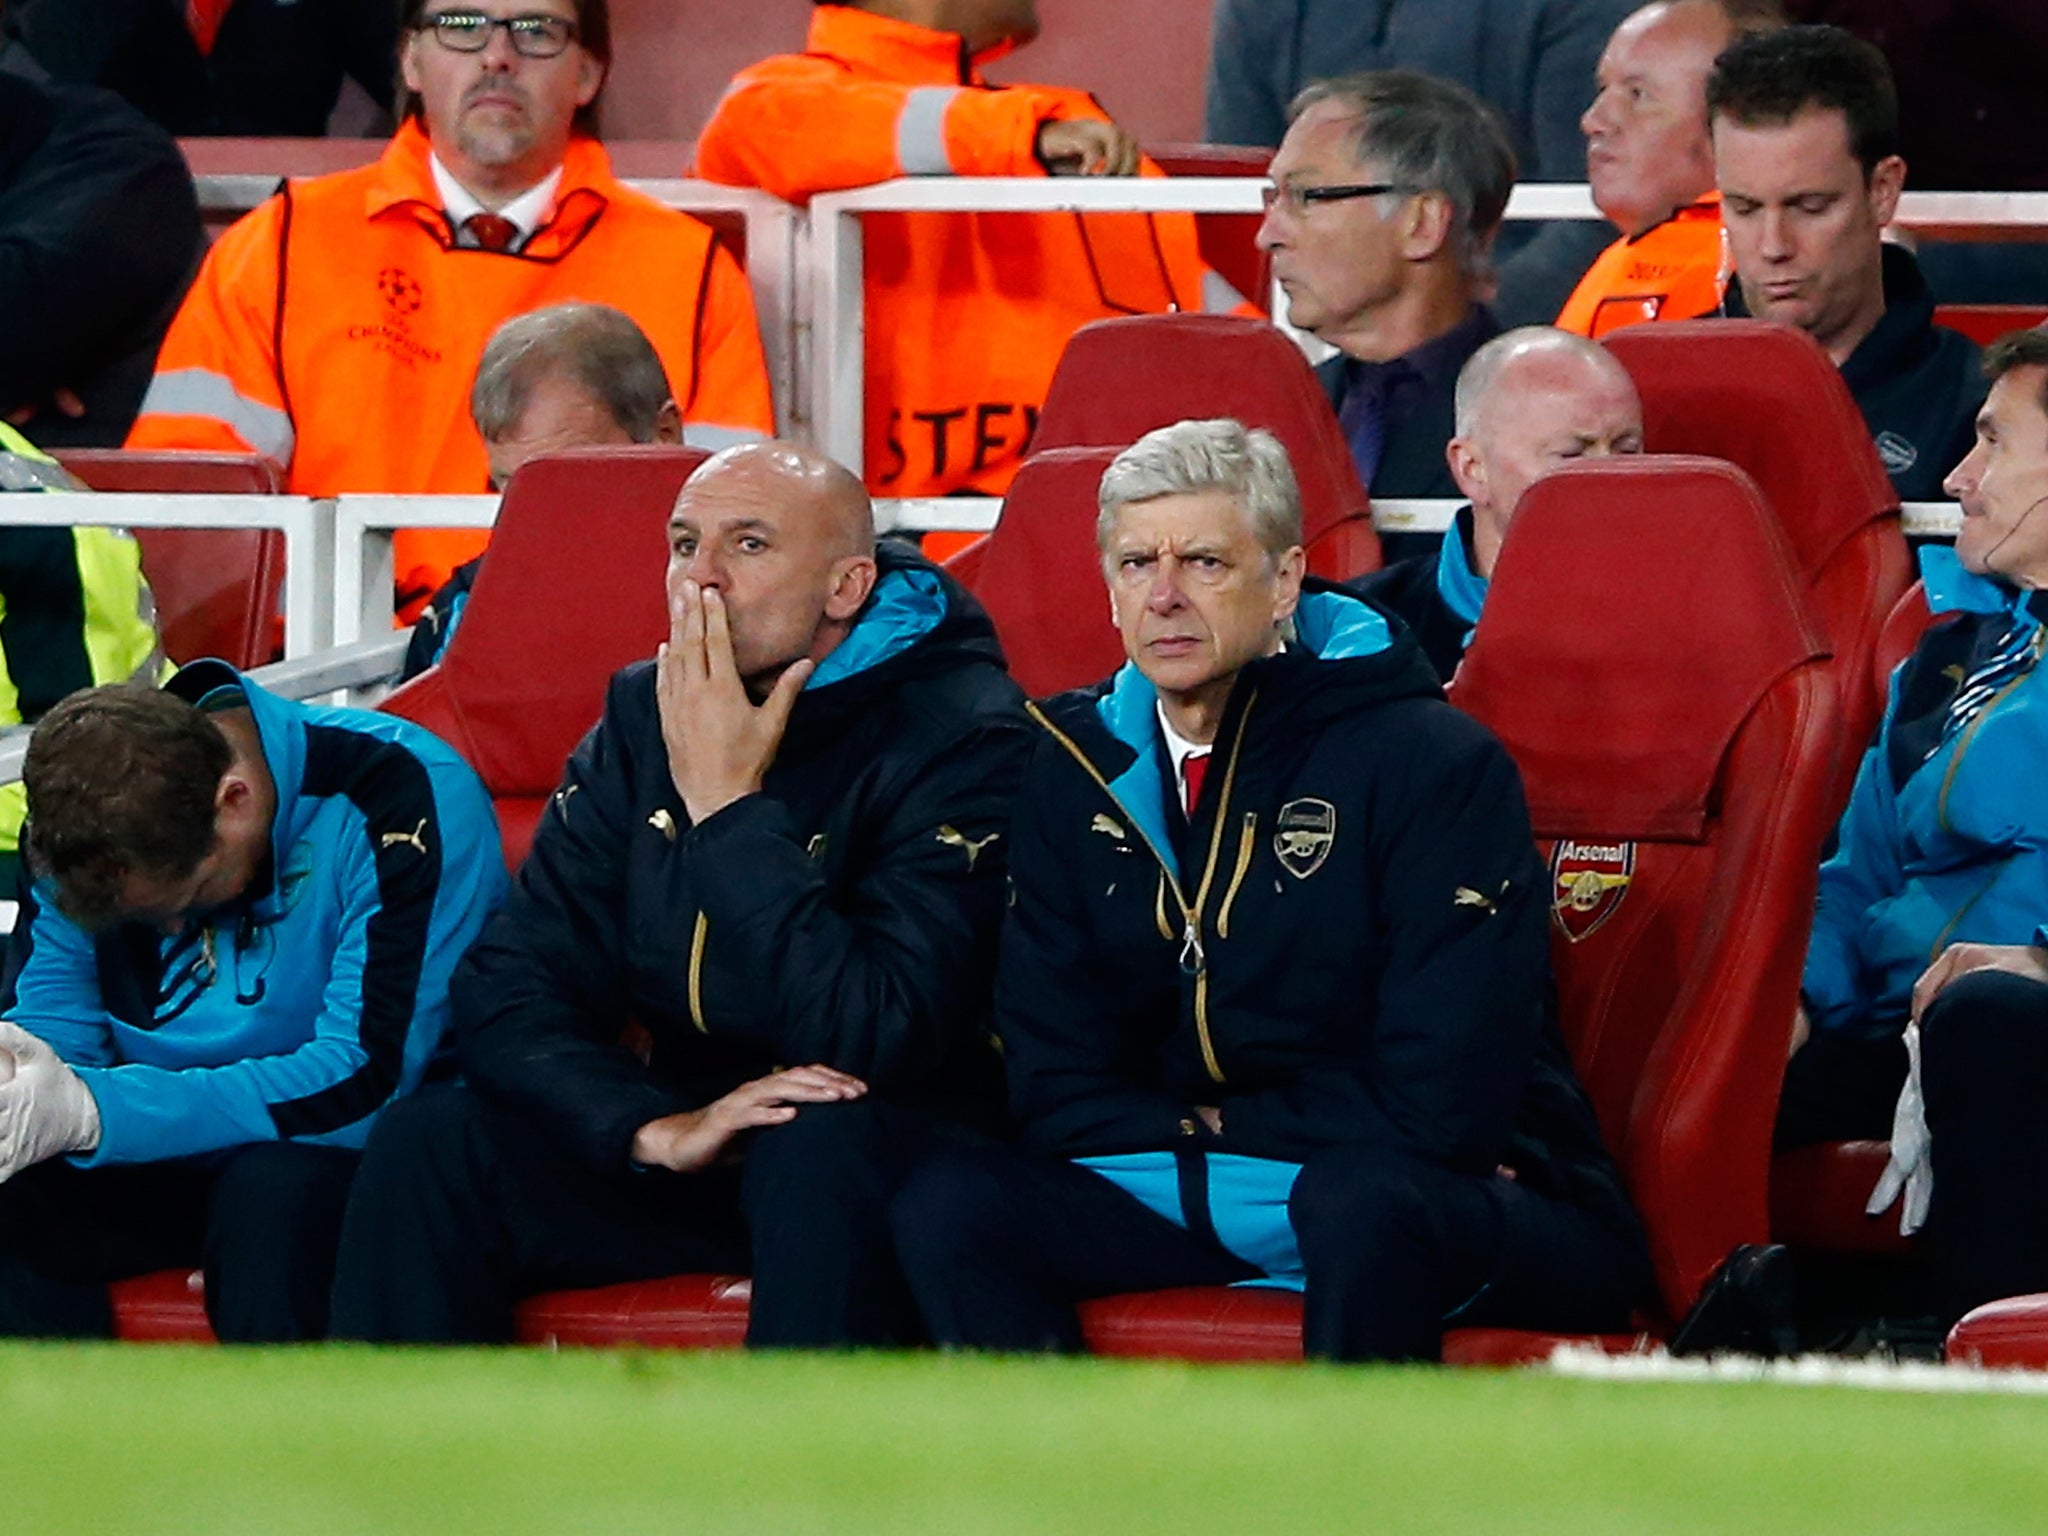 Arsene Wenger looks on from the stands